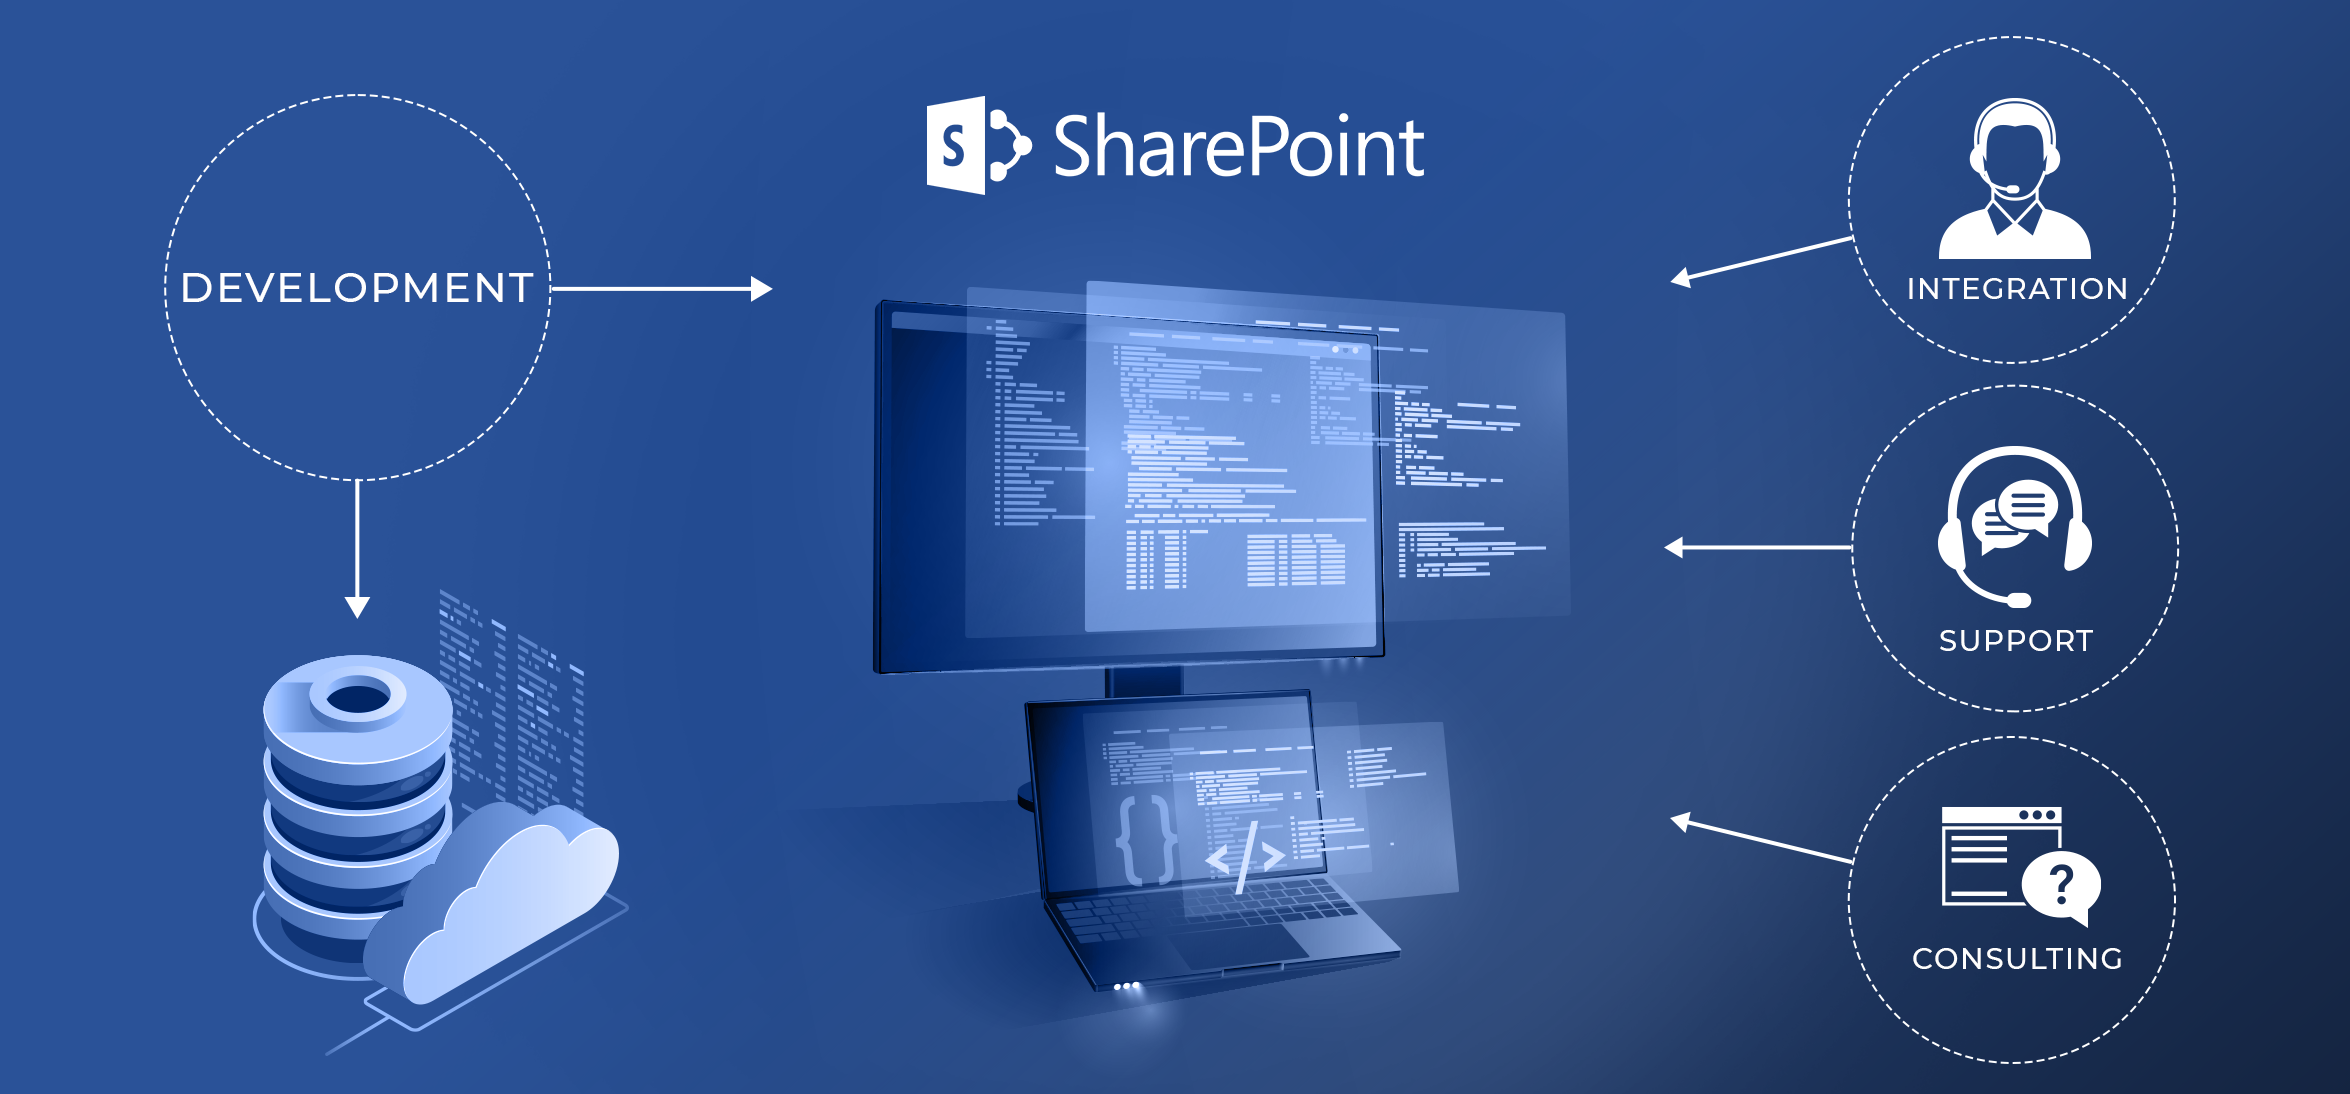 Microsoft Share Point Consult in Union NJ, 07083